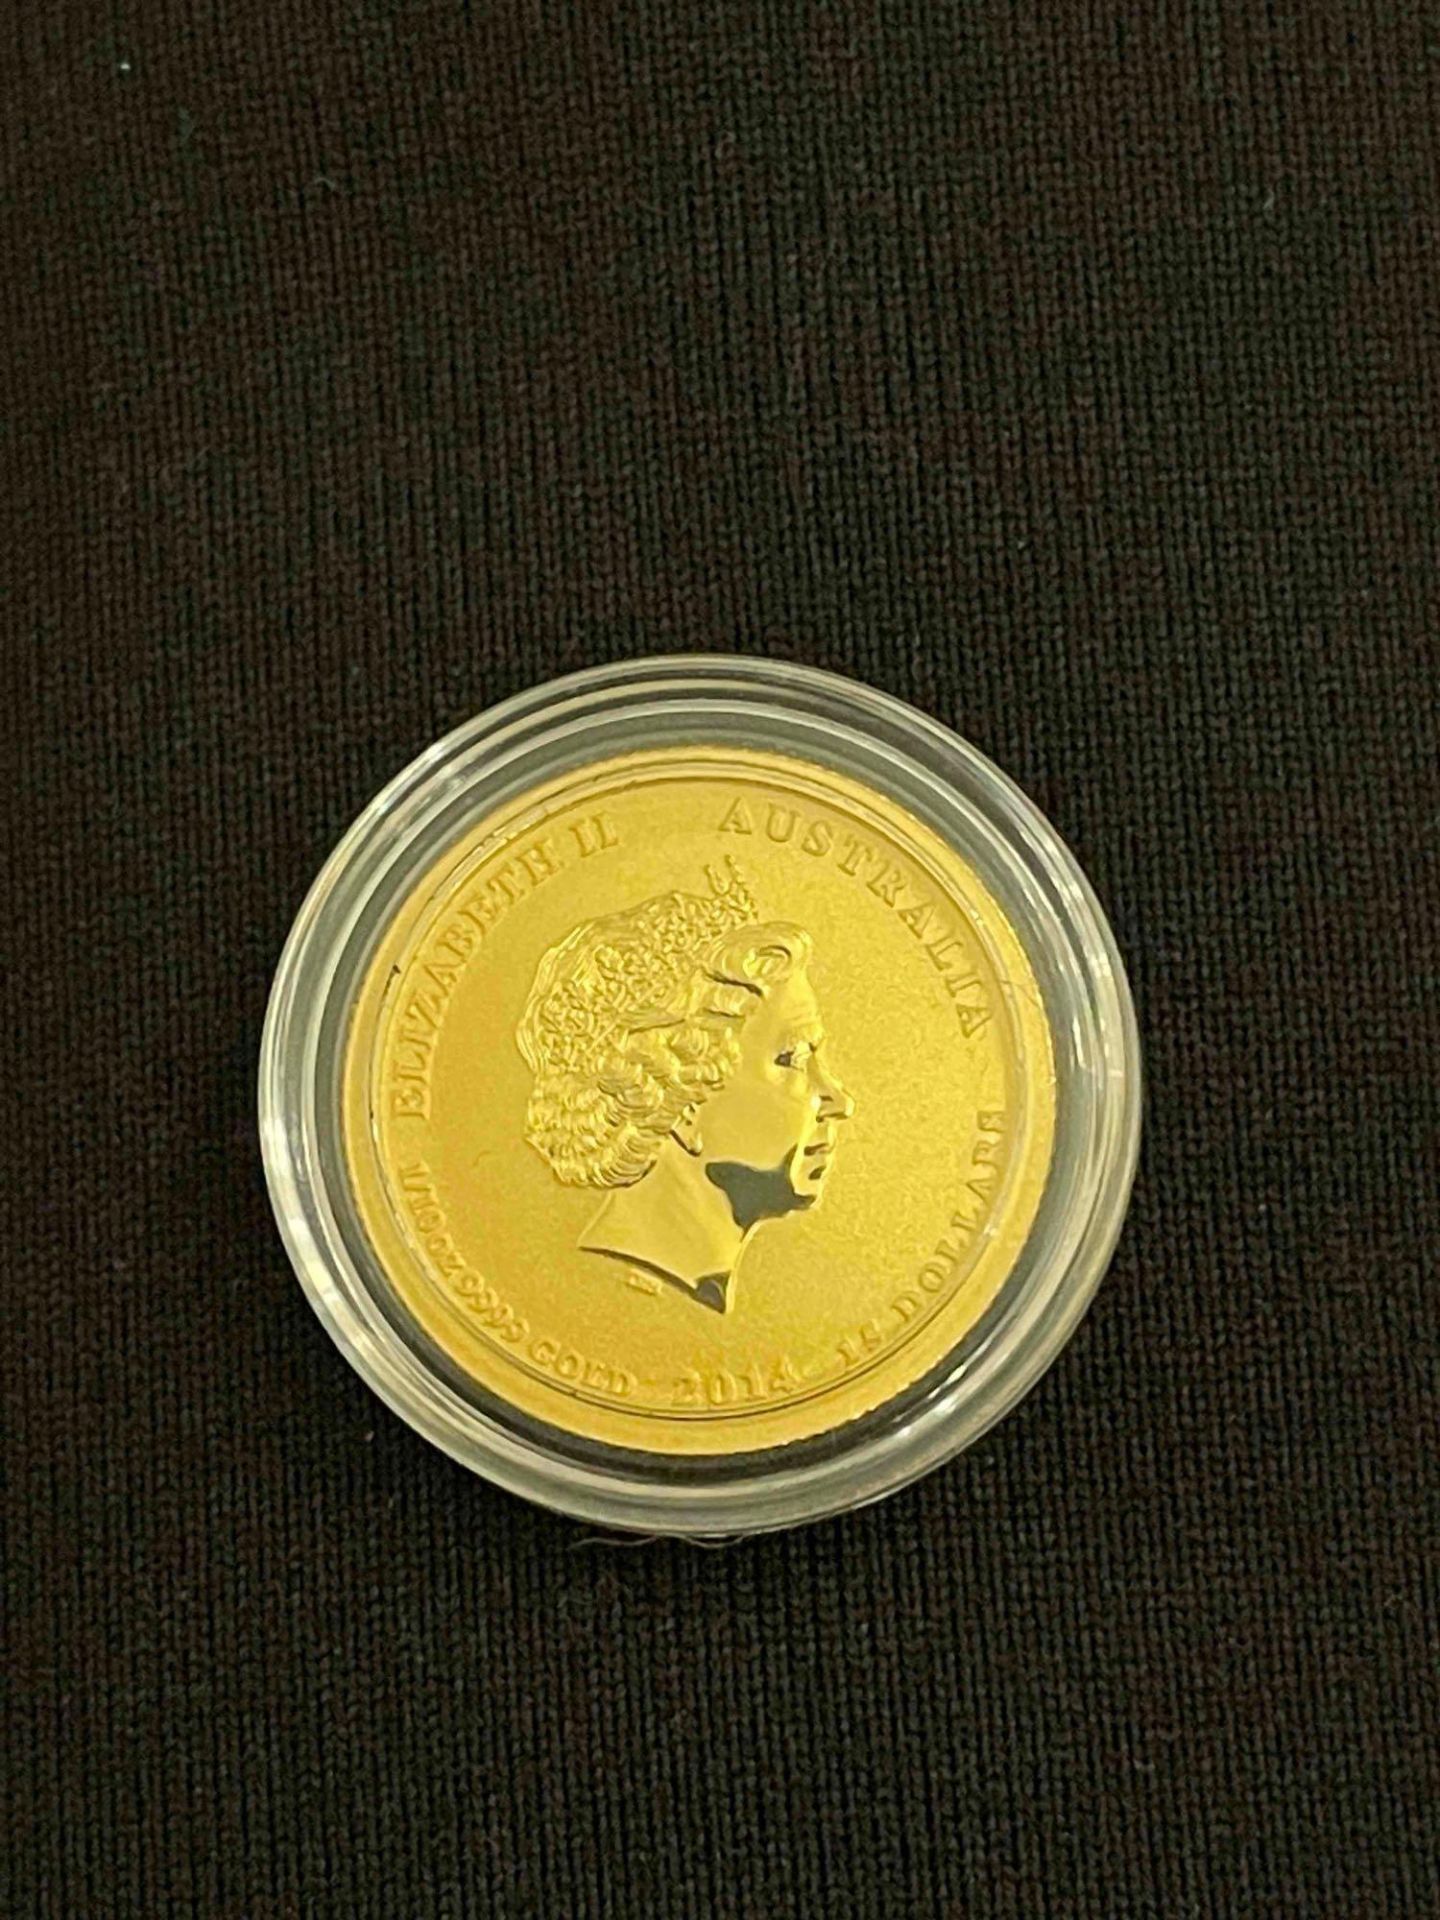 1/10 oz Gold Coin - Image 4 of 4